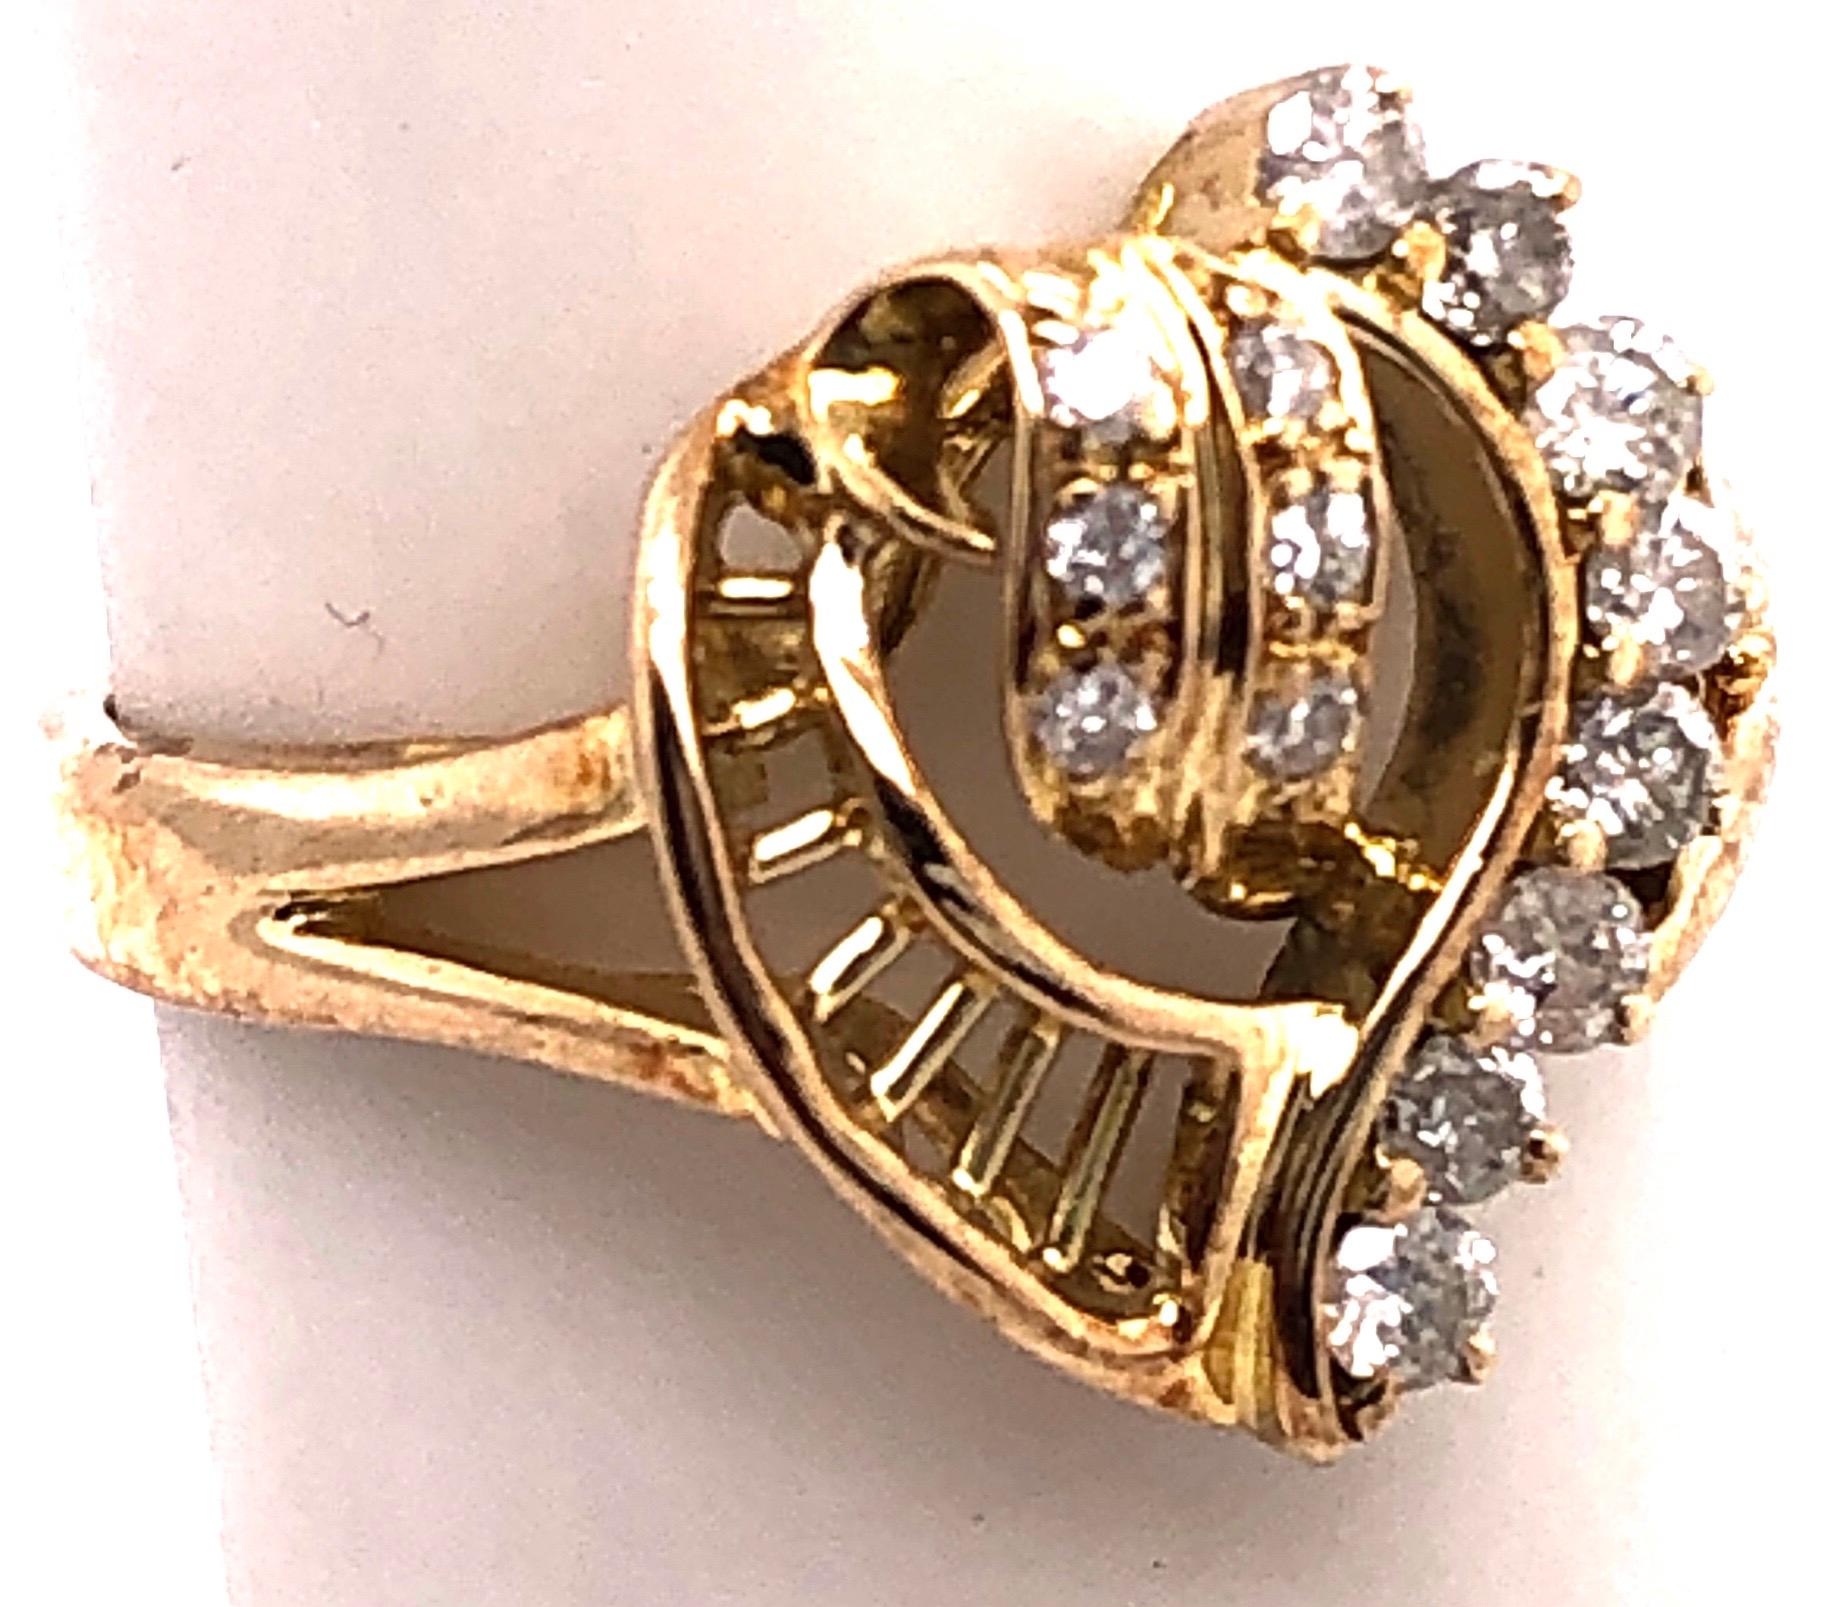 14 Karat Yellow Gold Fashion Ring/Heart with Round Diamonds.
0.75 total diamond weight.
Size 7
4 grams total weight.